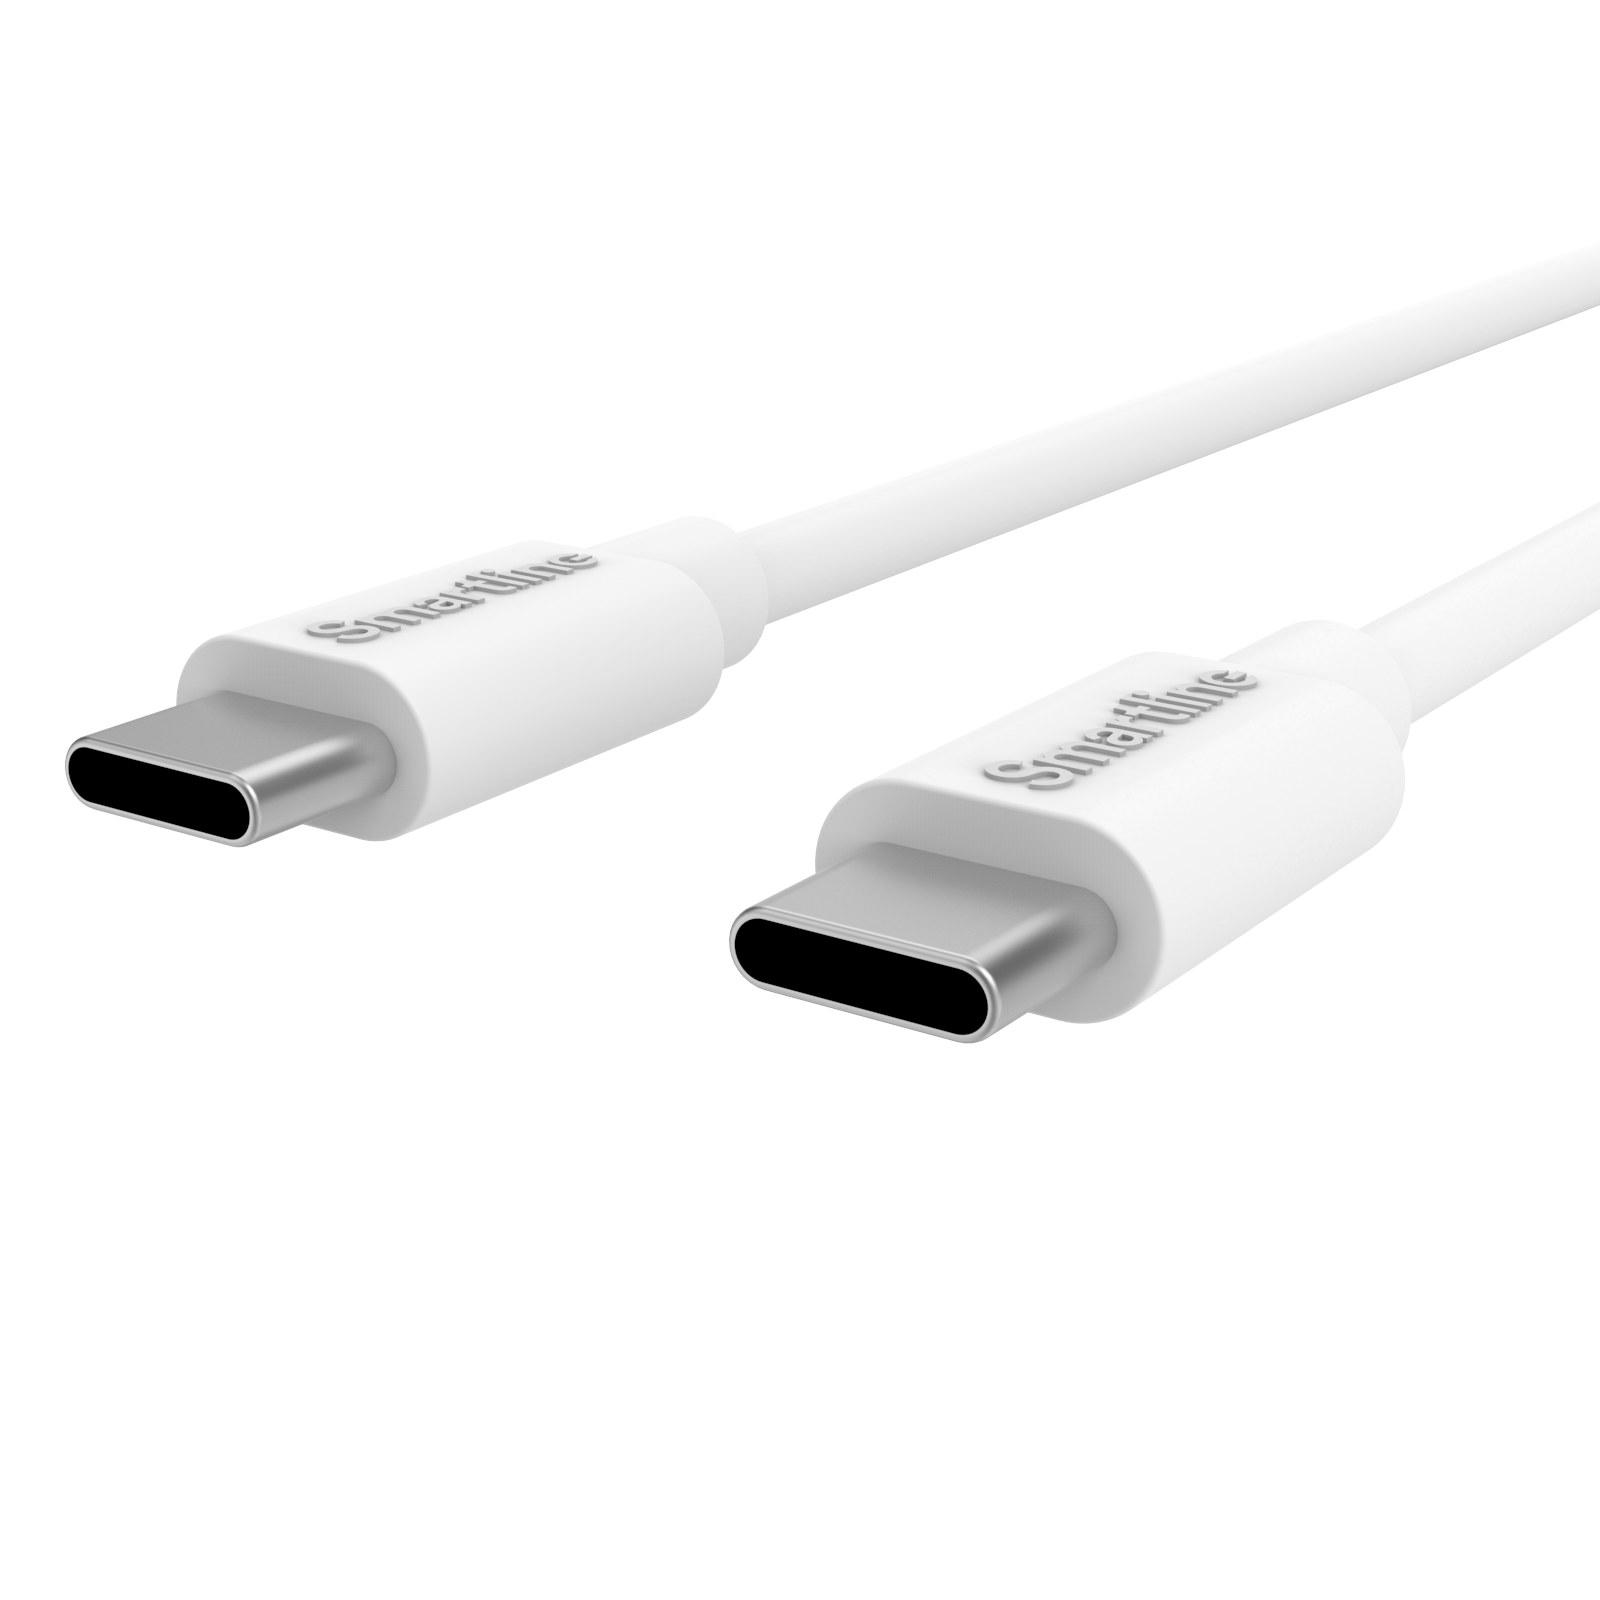 Complete iPhone Charger with USB-C - 2m Cable and Wall Charger - Smartline